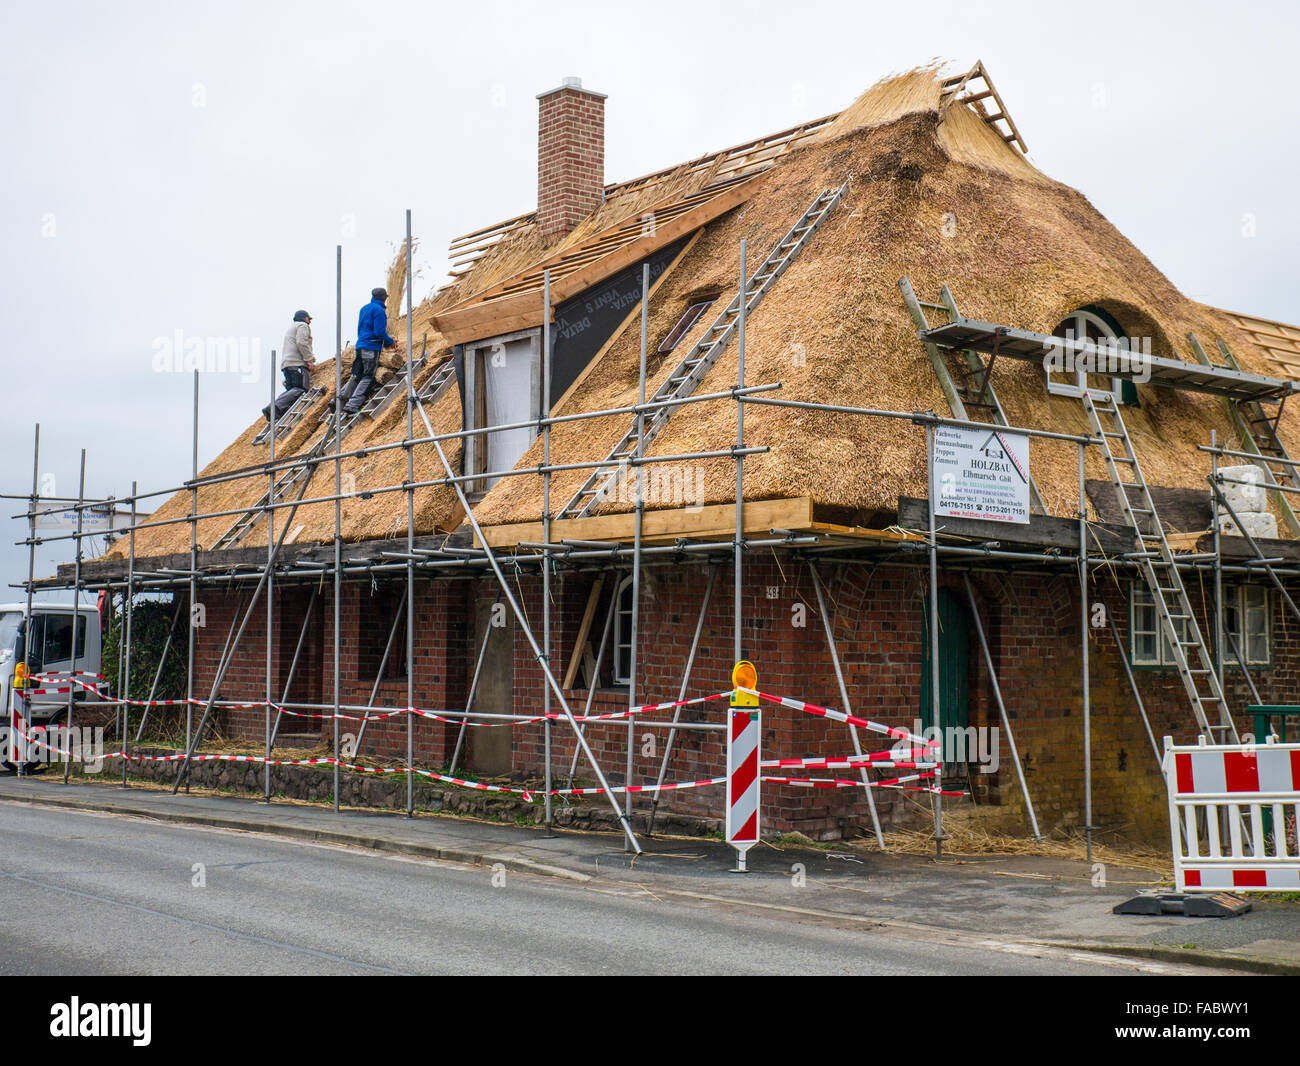 Thatchers at work restoring the thatched roof of an old farmhouse. Stock Photo